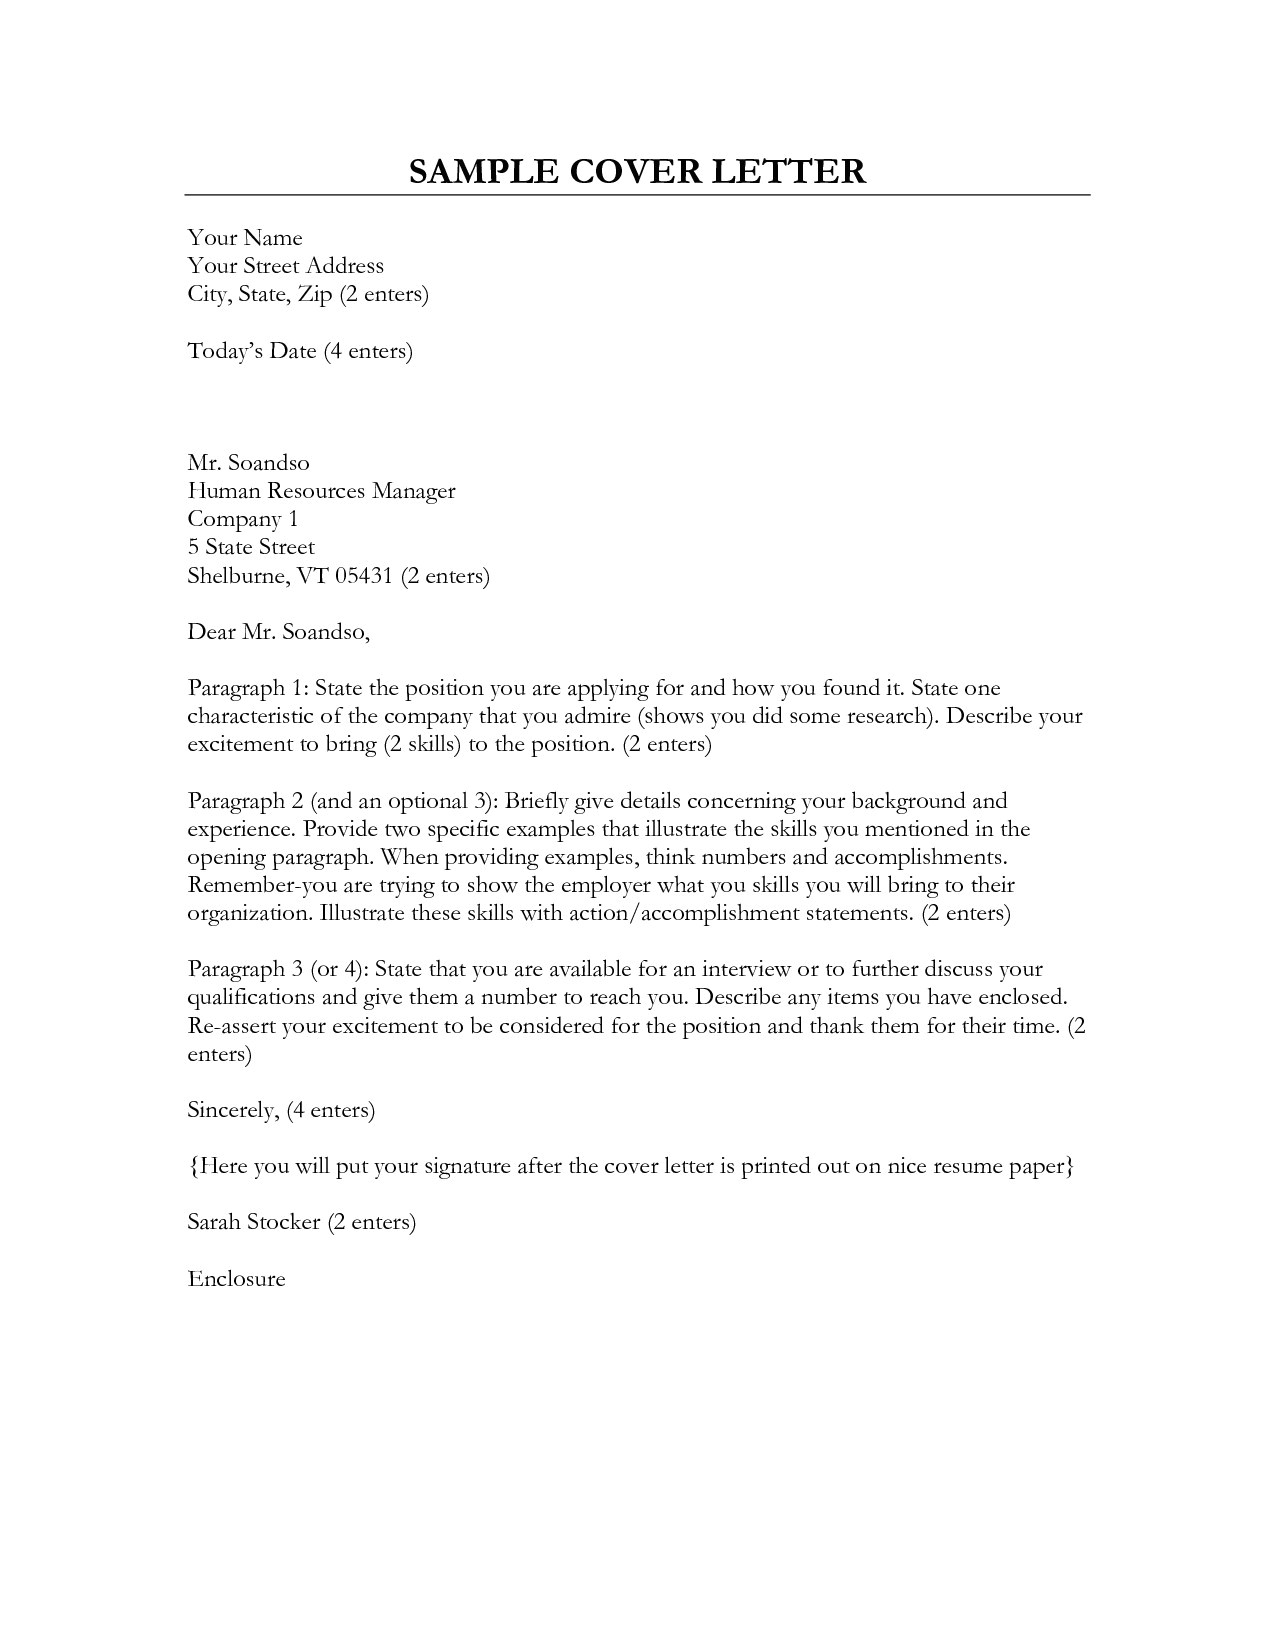 Addressing A Cover Letter to Human Resources Cover Letter Addressed to Hr the Letter Sample